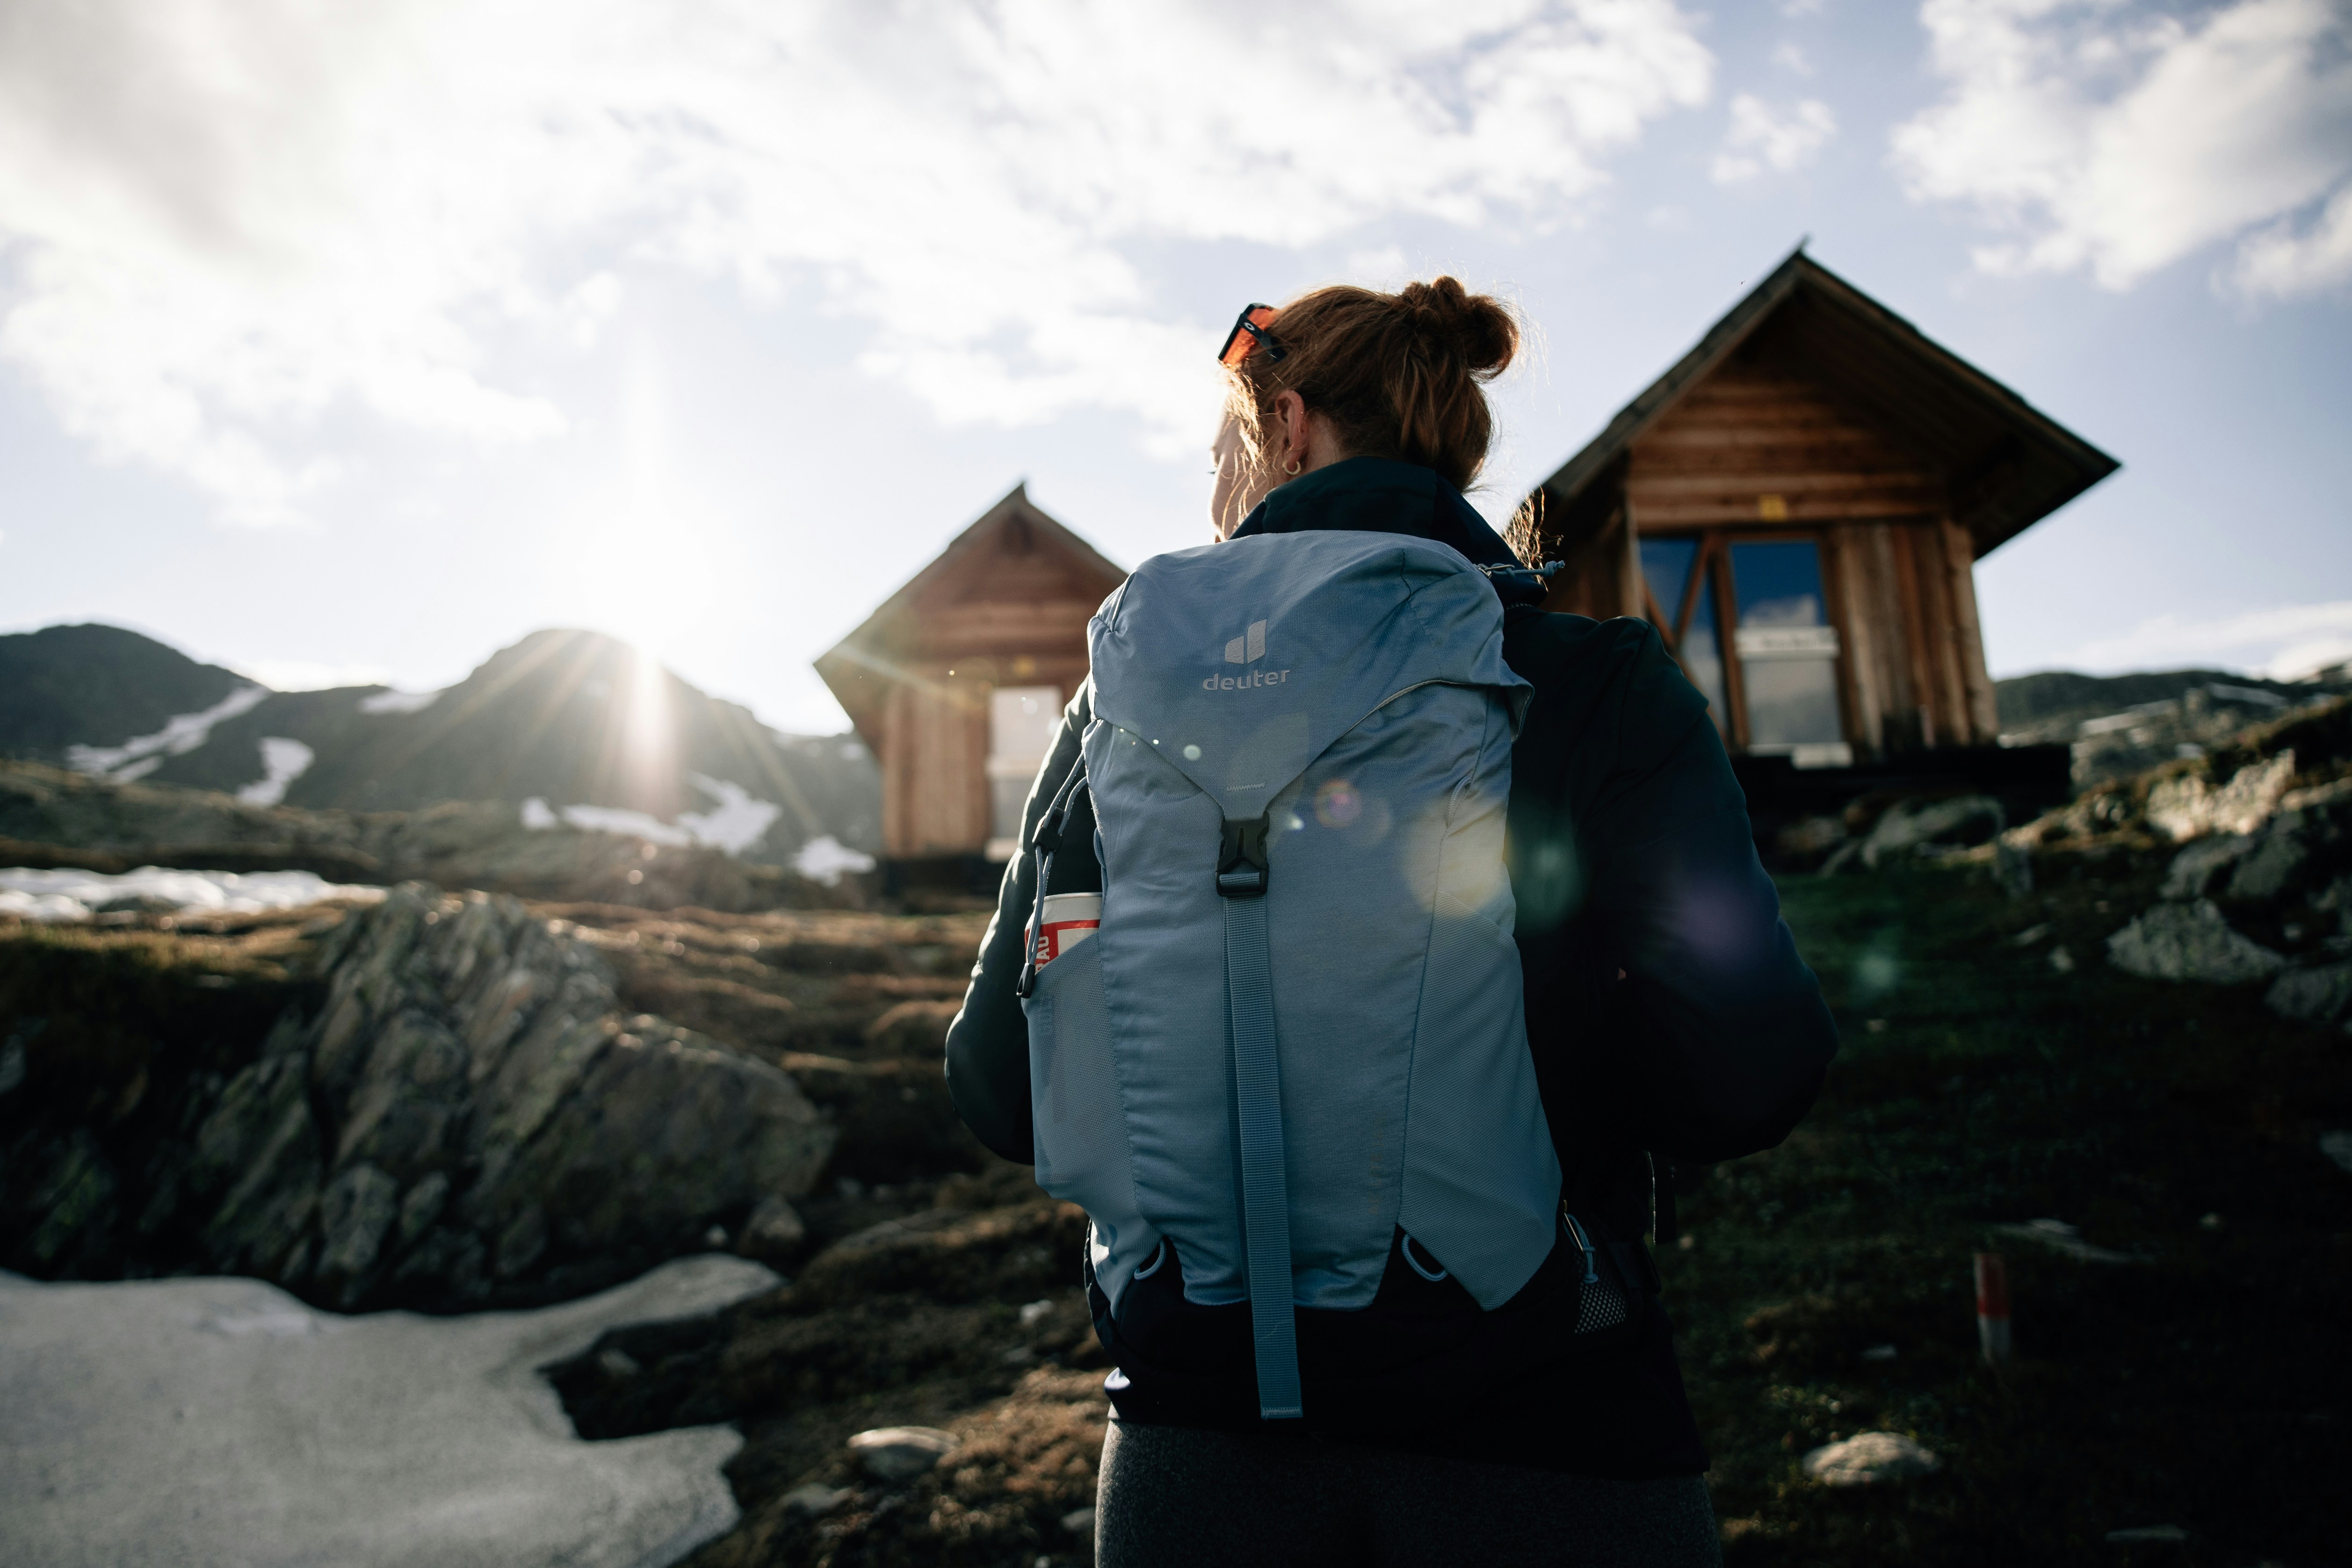 women with backpack near mountain hut